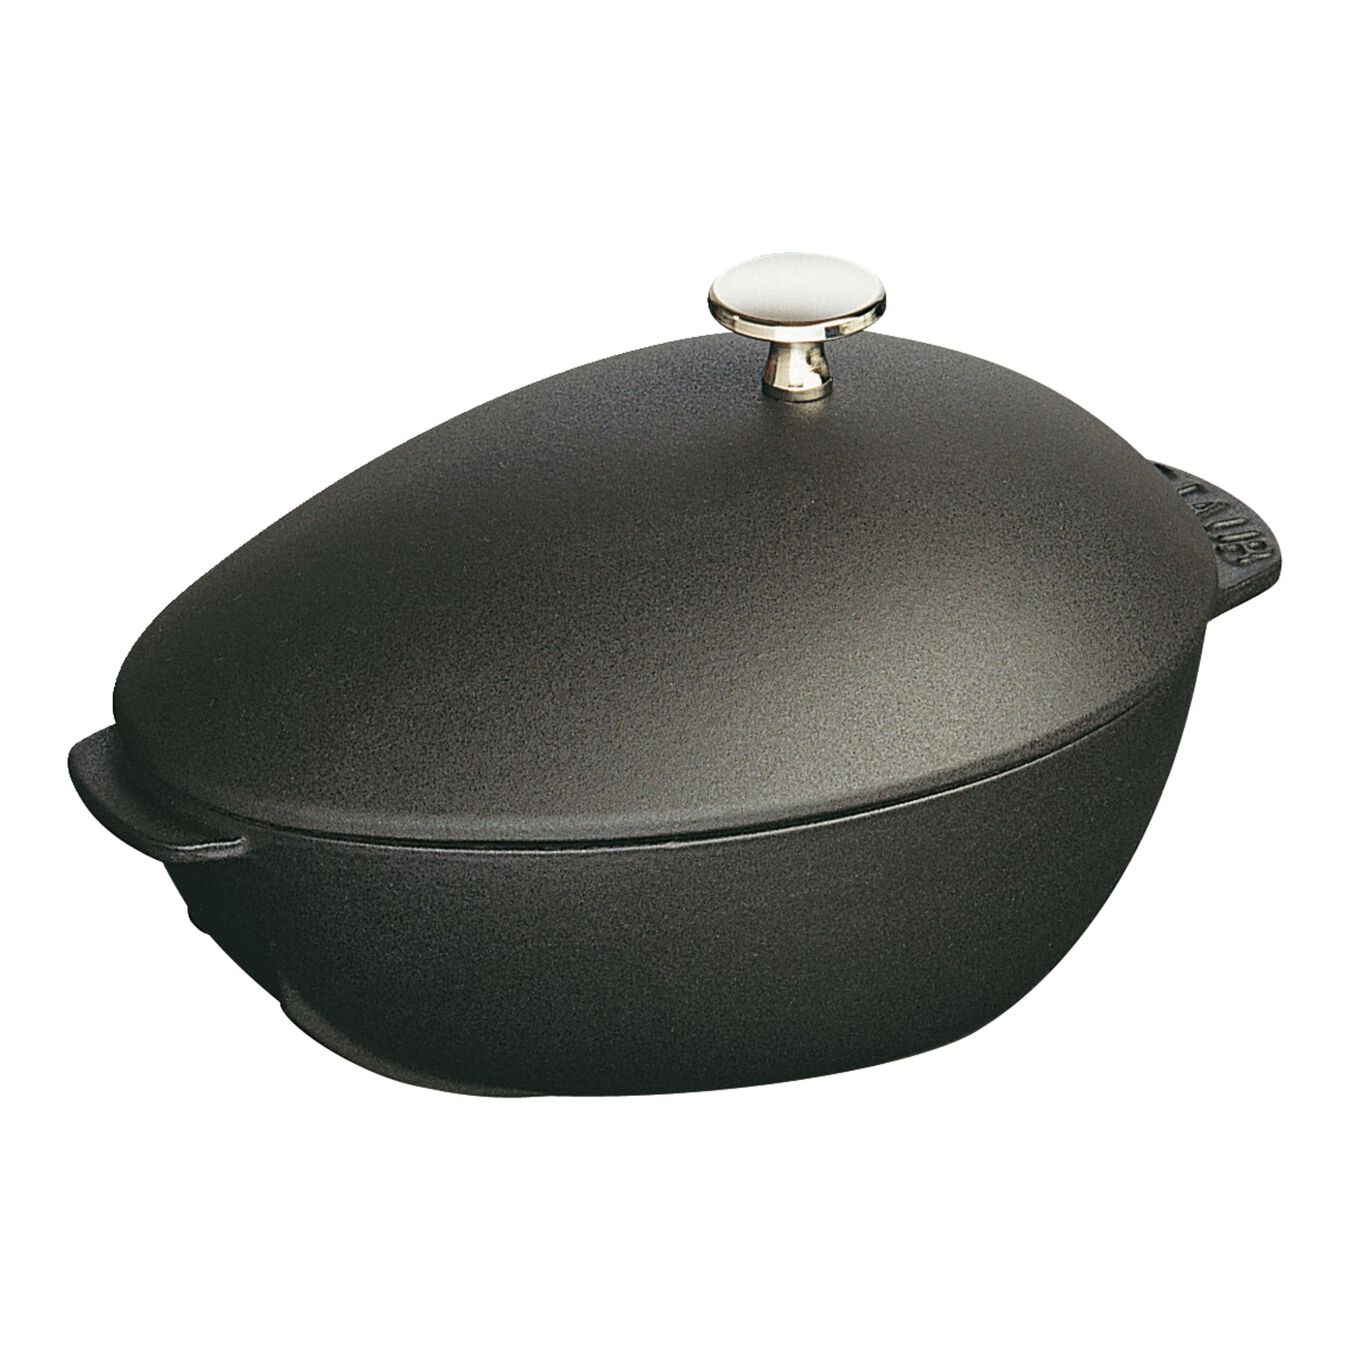 2 l cast iron oval Mussel pot, black - Visual Imperfections,,large 1